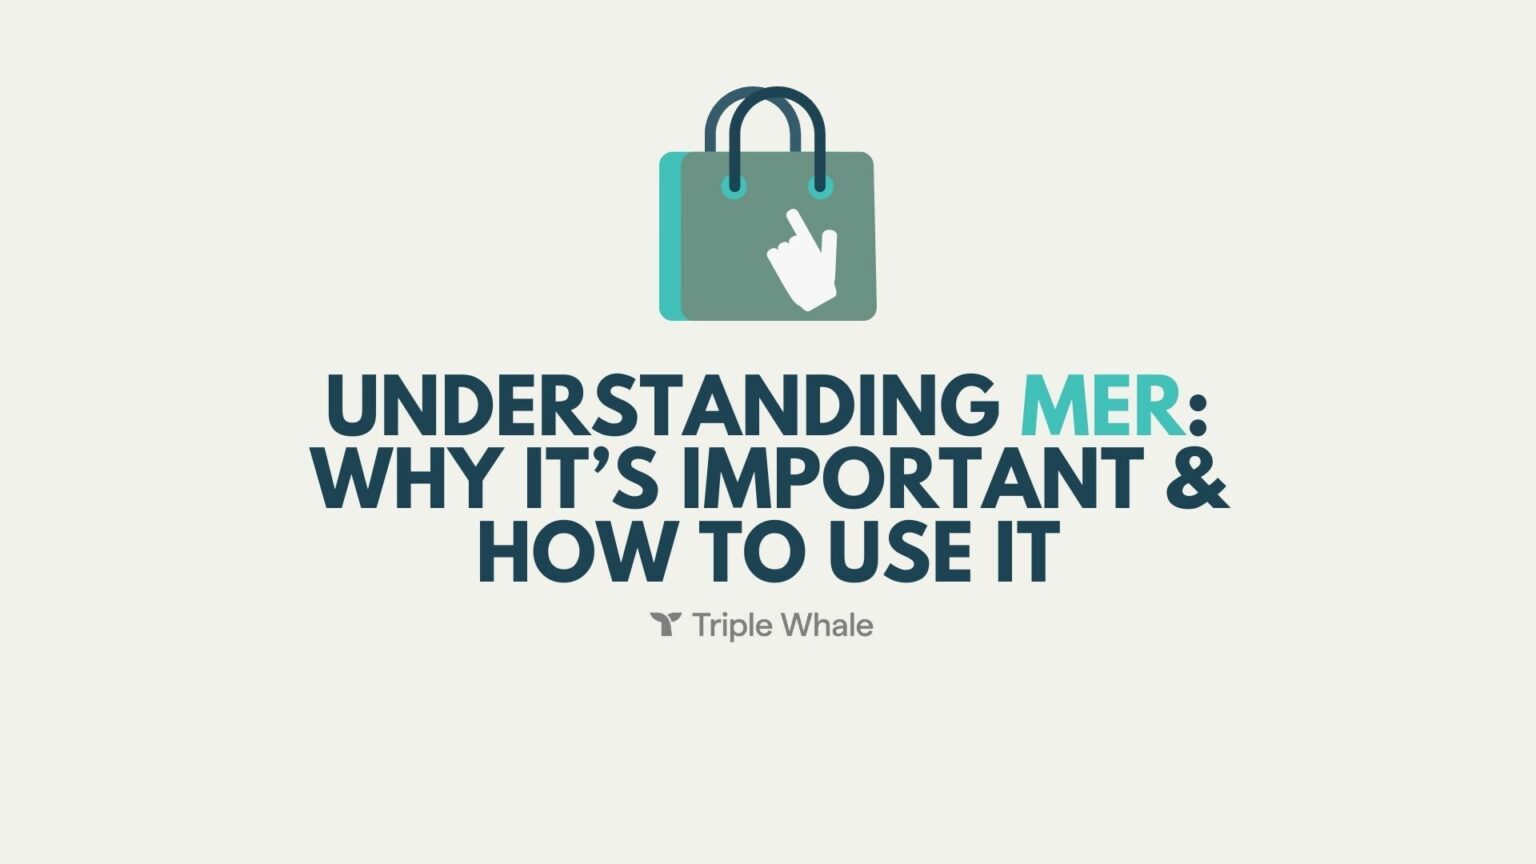 Understanding MER: Why It’s Important & How to Use It